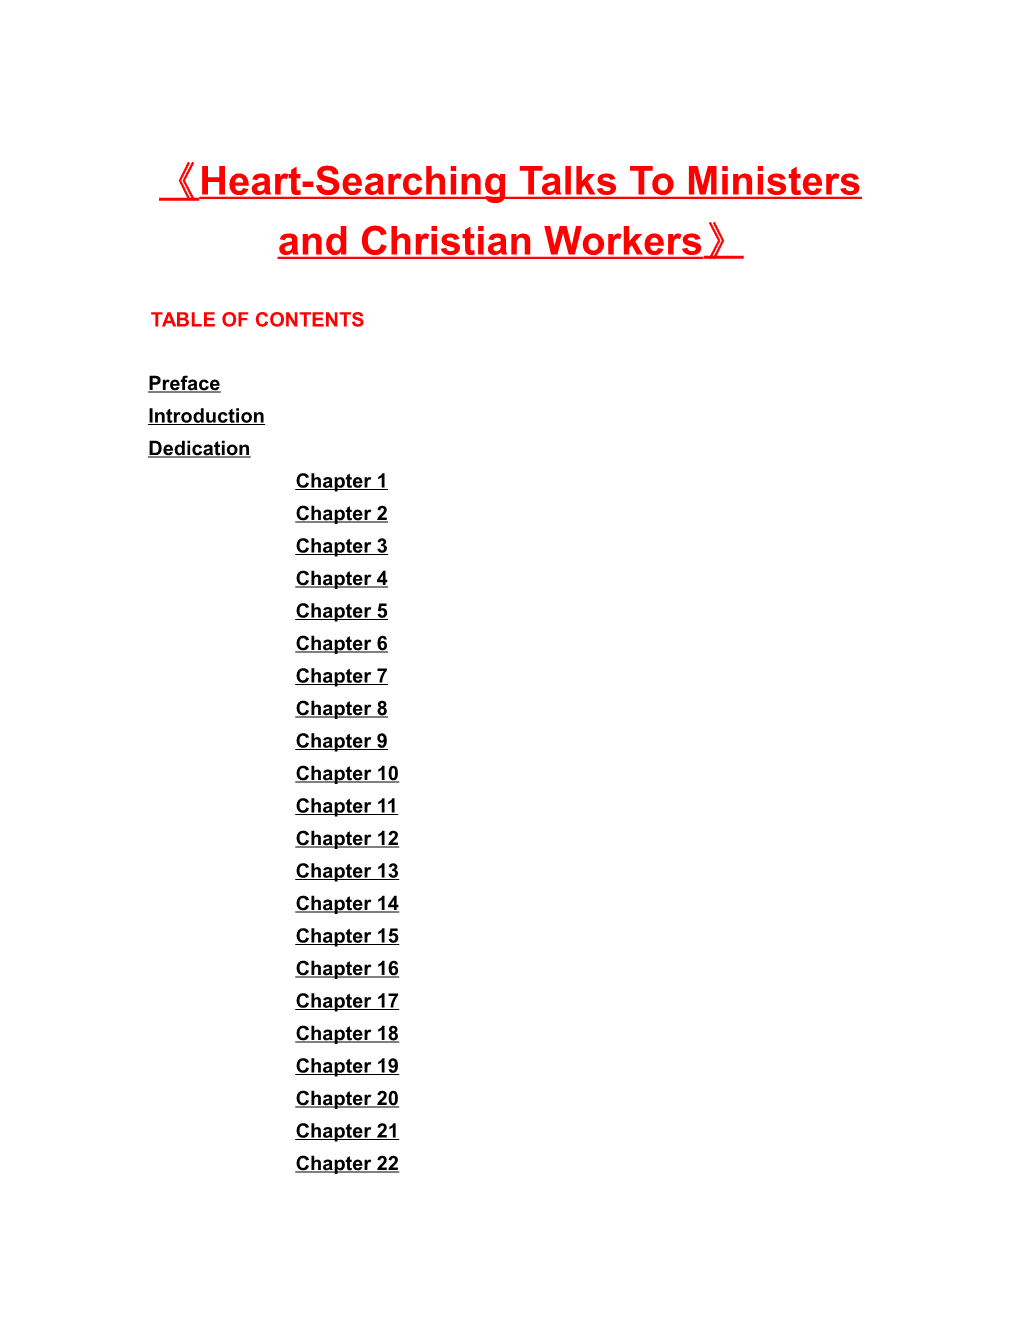 Heart-Searching Talks to Ministers and Christian Workers